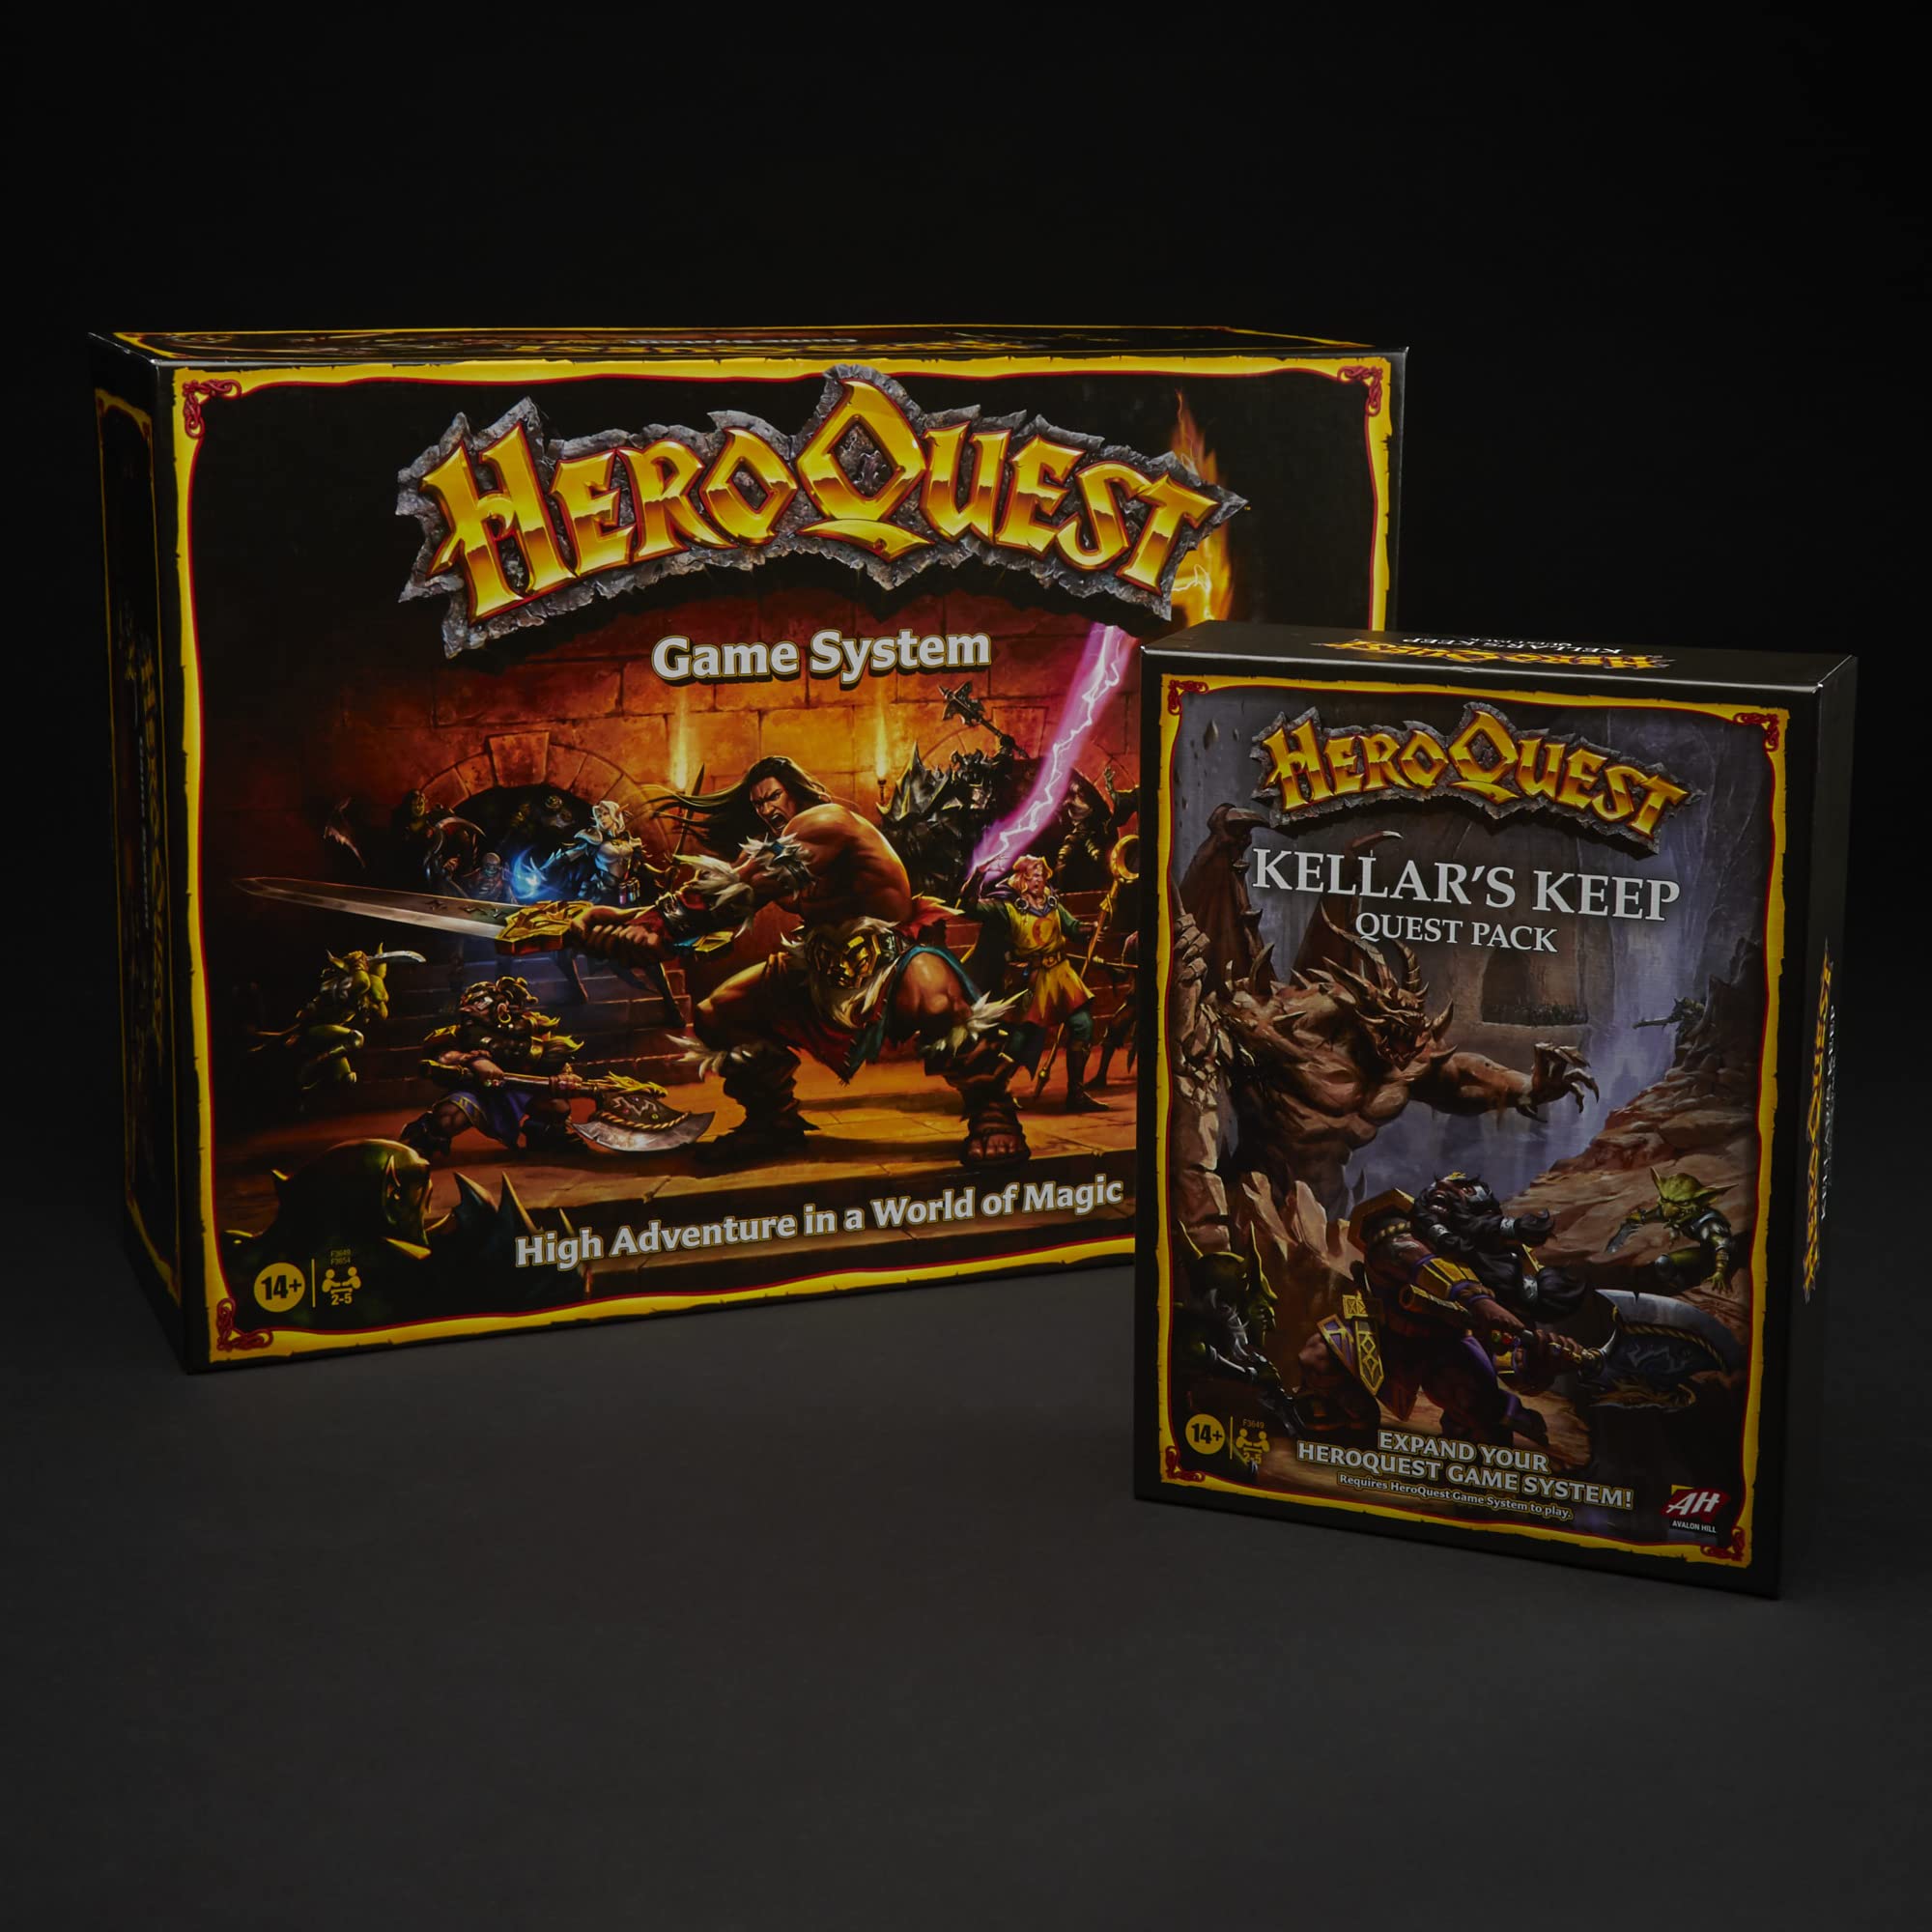 Avalon Hill HeroQuest Kellar's Keep Expansion, Dungeon Crawler Board Game for Ages 14 and Up 2-5 Players Requires HeroQuest Game System to Play